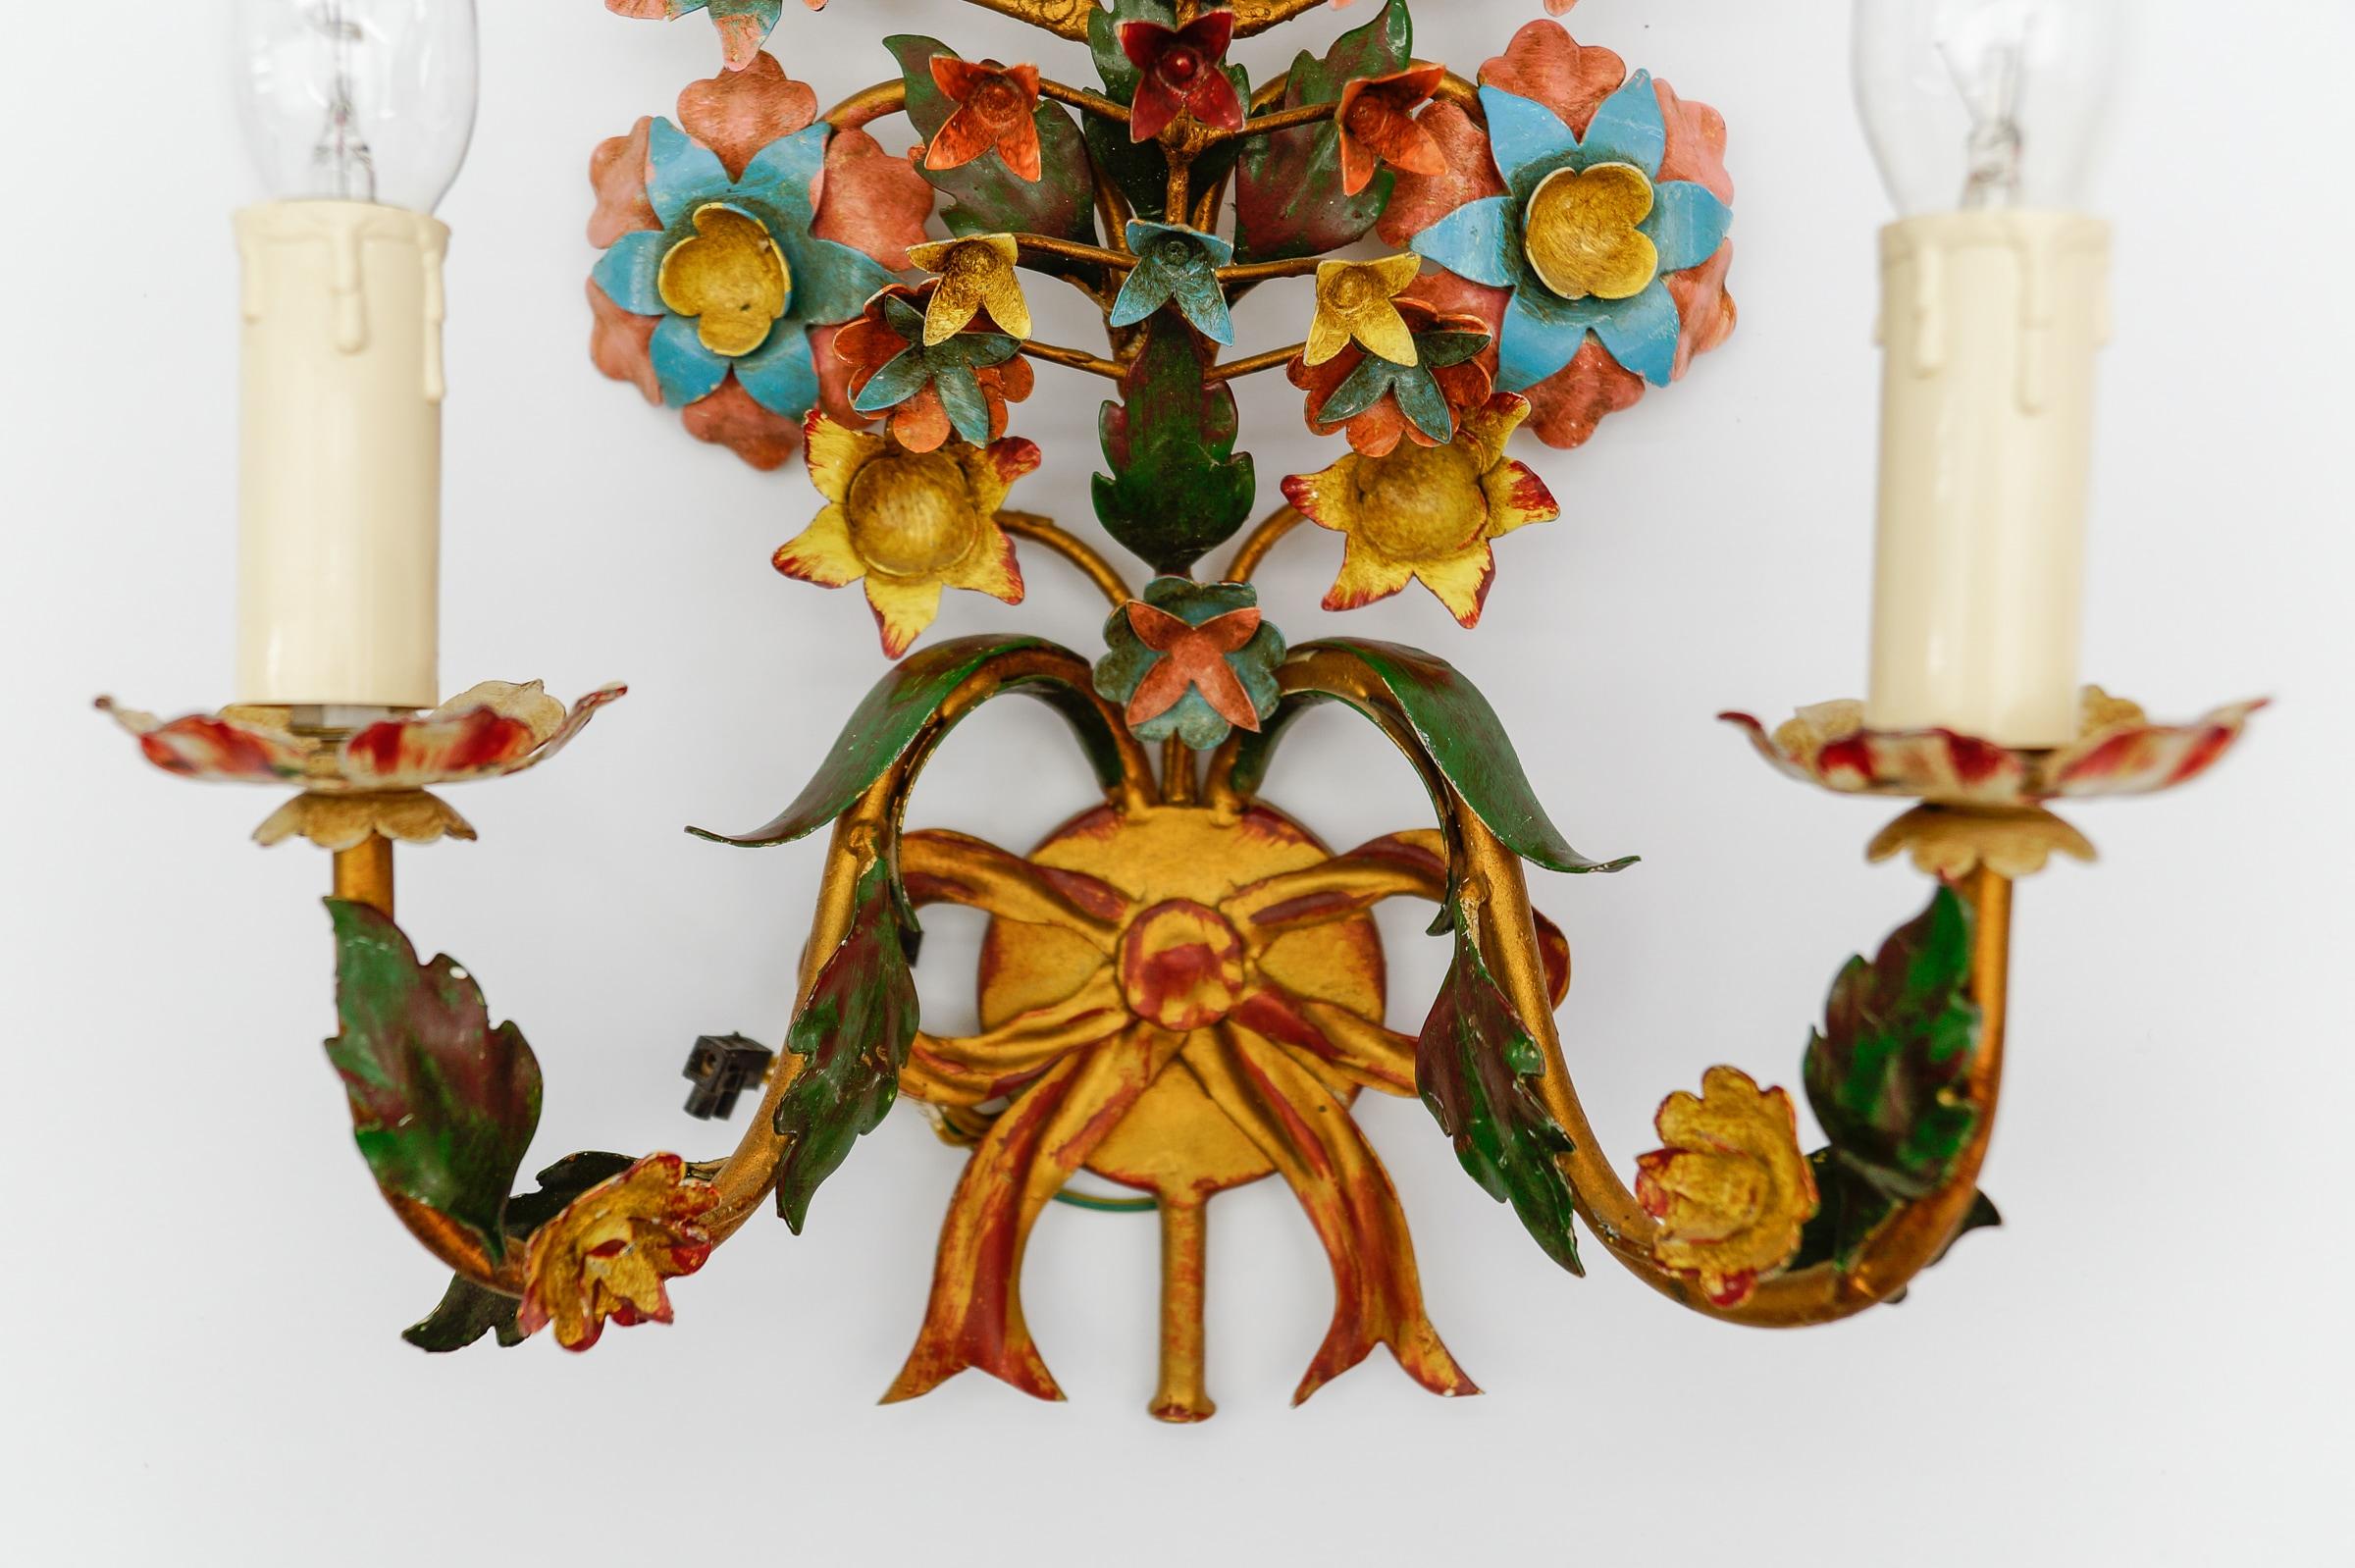 Pair of Colorful Florentiner Double Flower Wall Lights, Italy 1970s For Sale 6